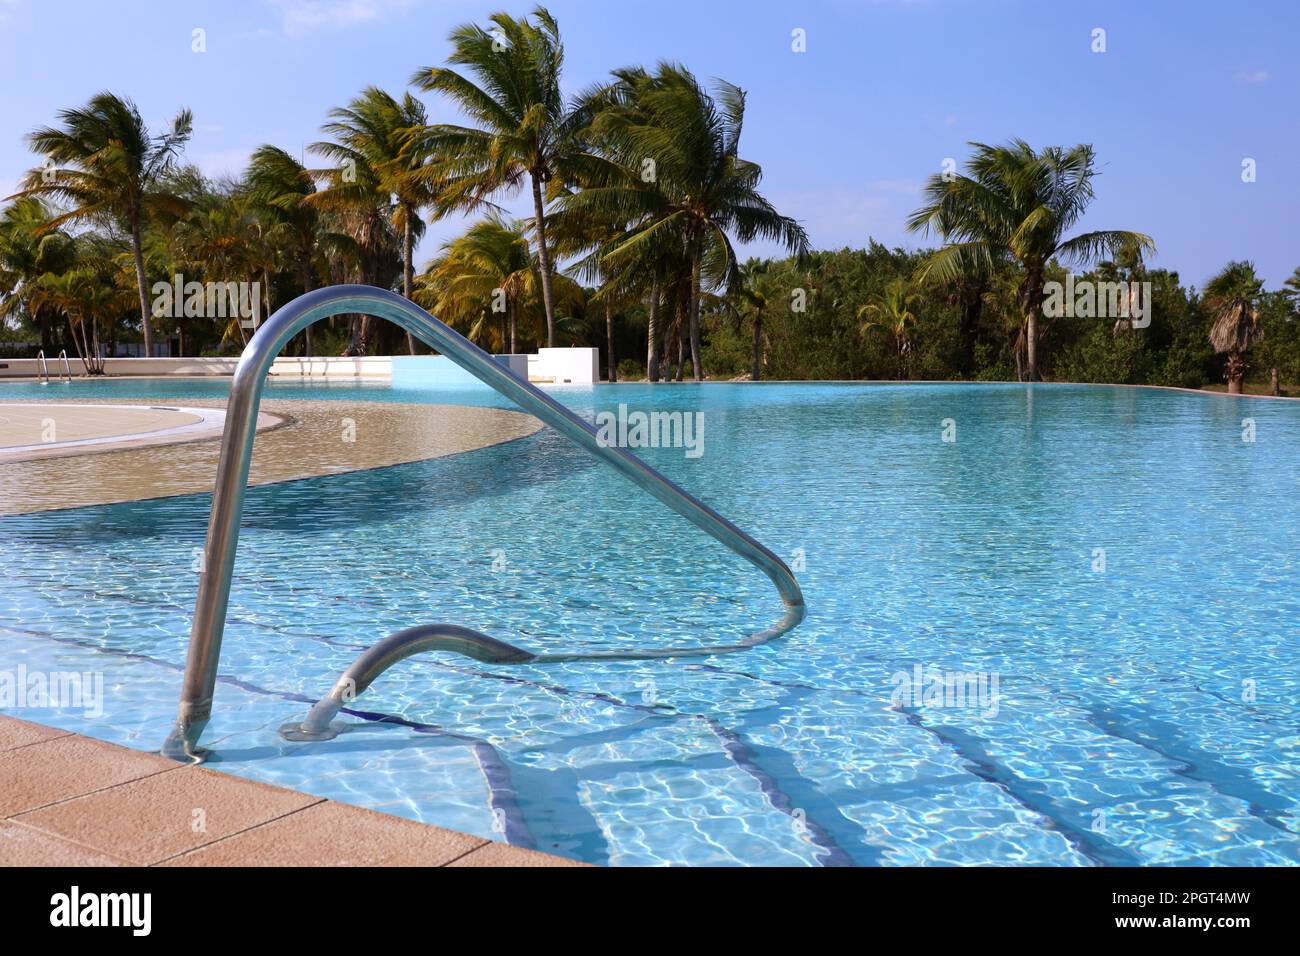 View to steps into the swimming pool with a railing against coconut palm trees. Vacation on beach resort on tropical island Stock Photo